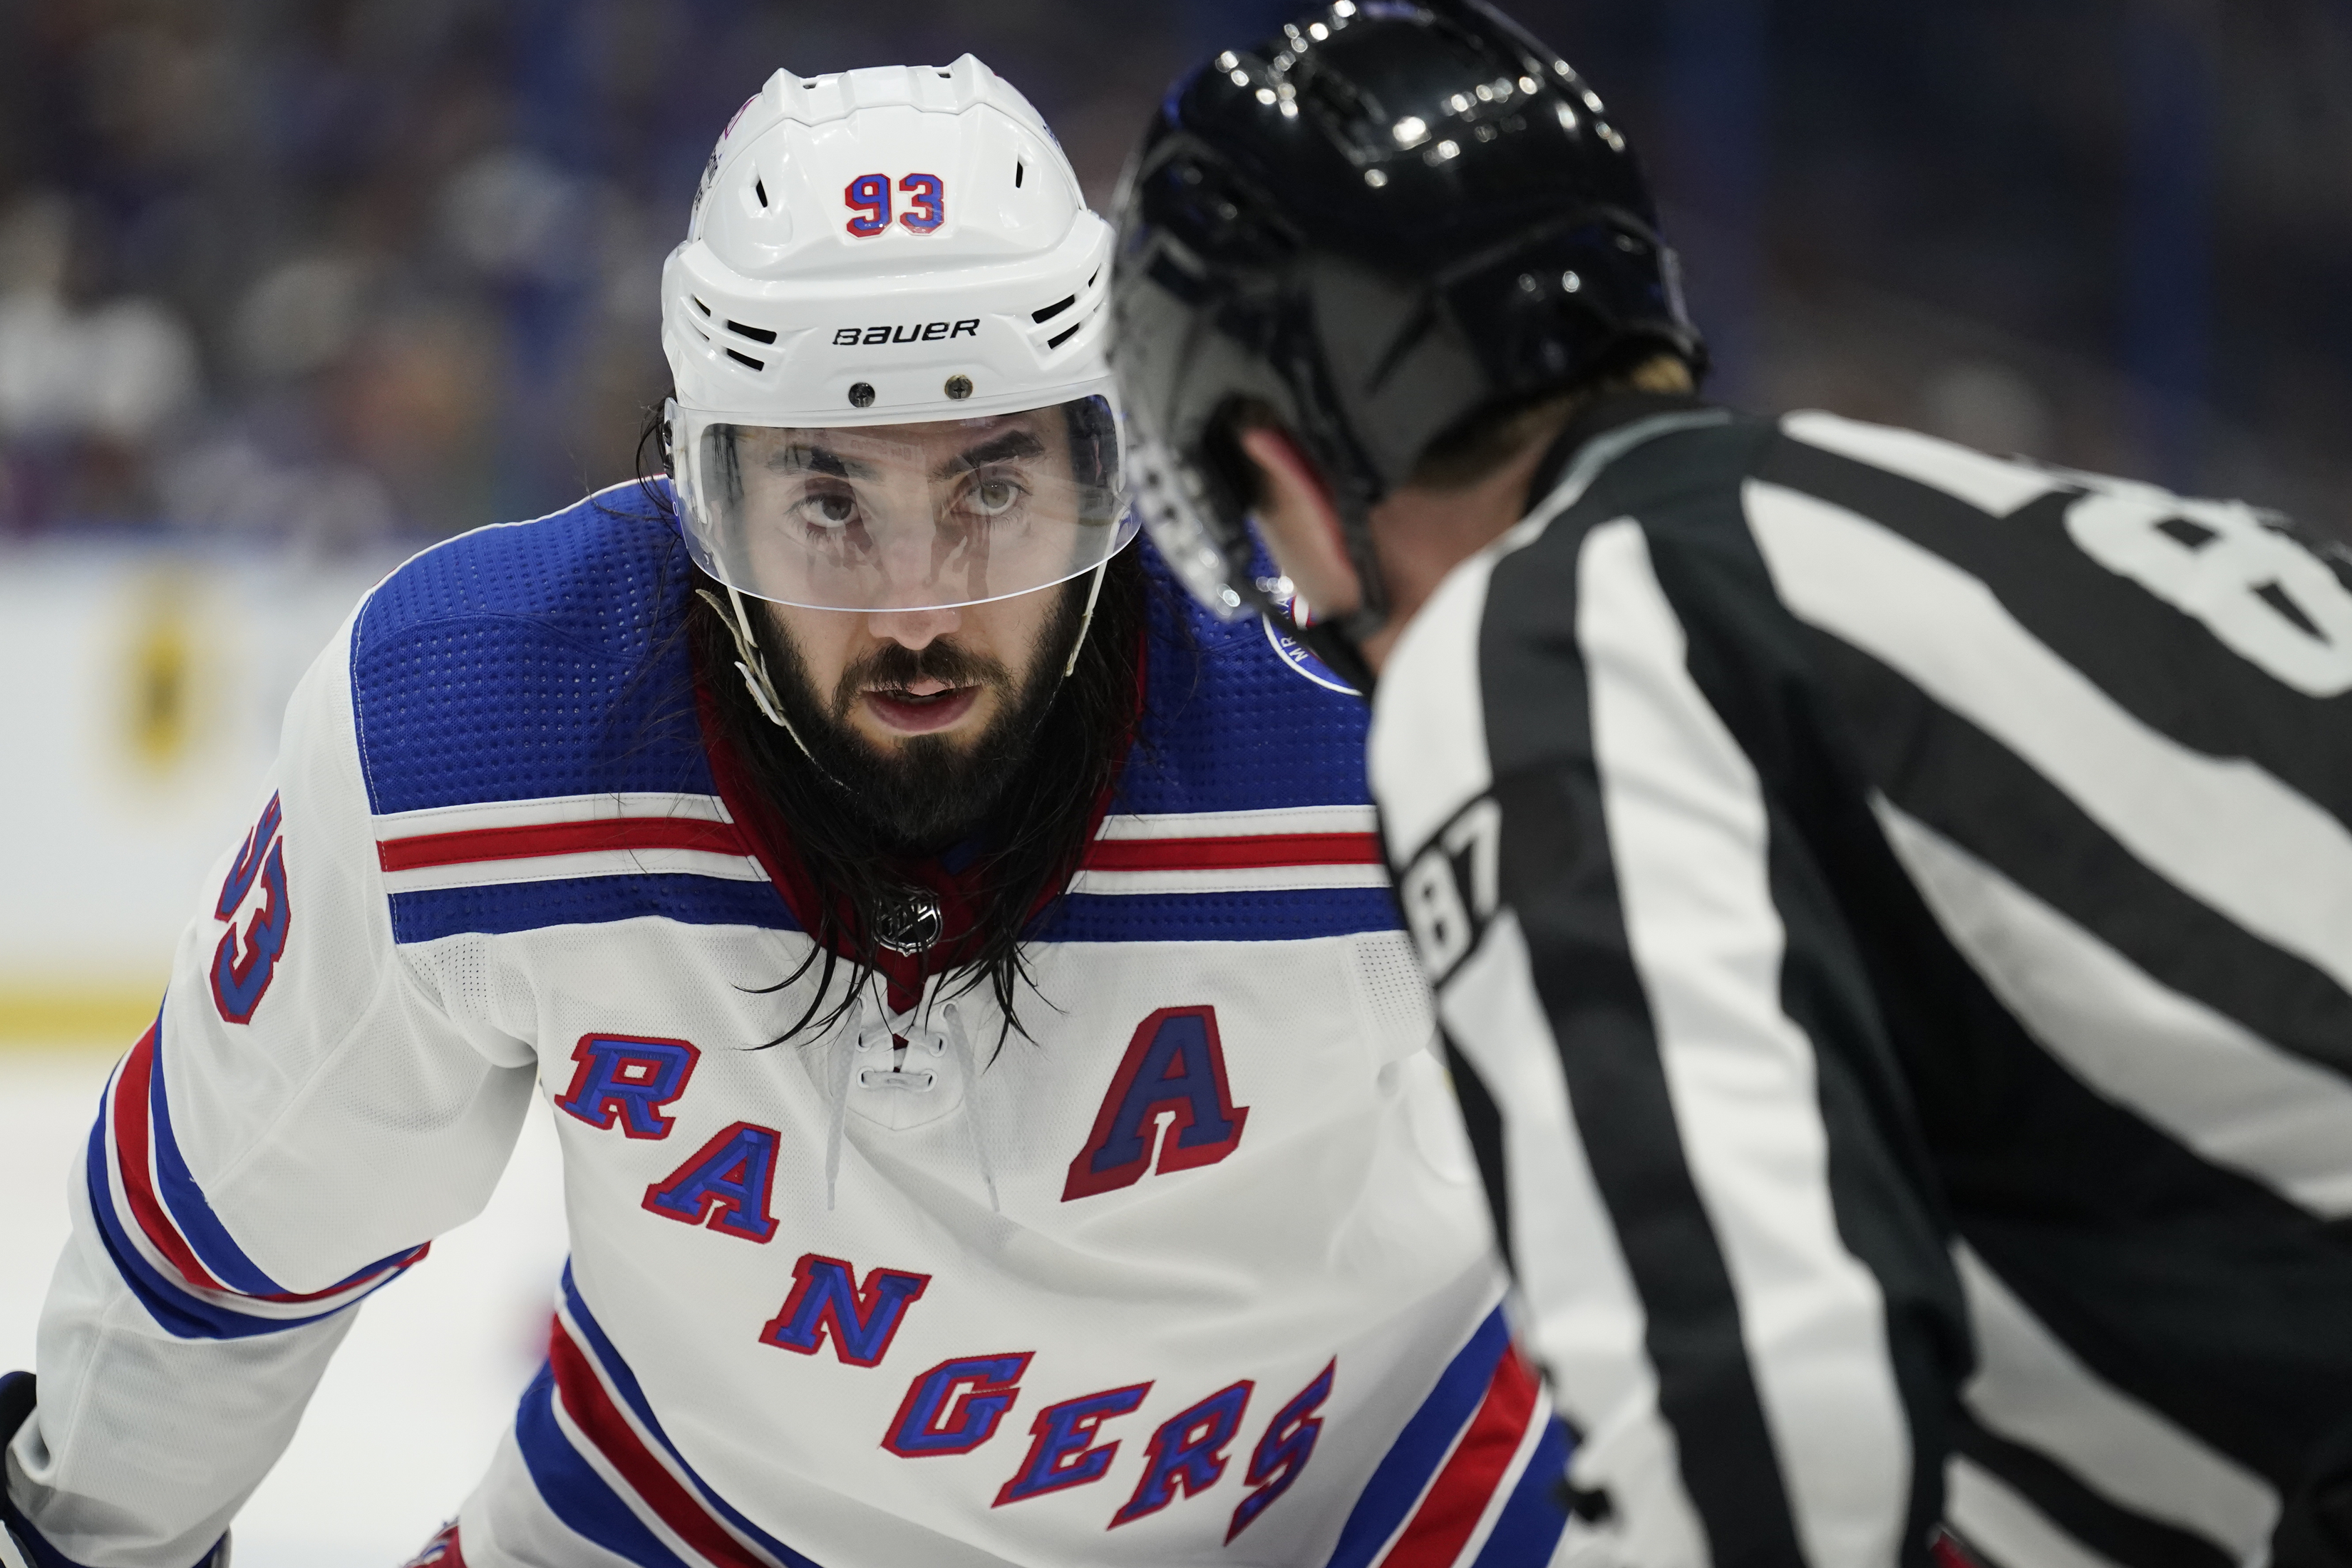 How to watch Rangers vs. Lightning Game 6: NHL Eastern Conference